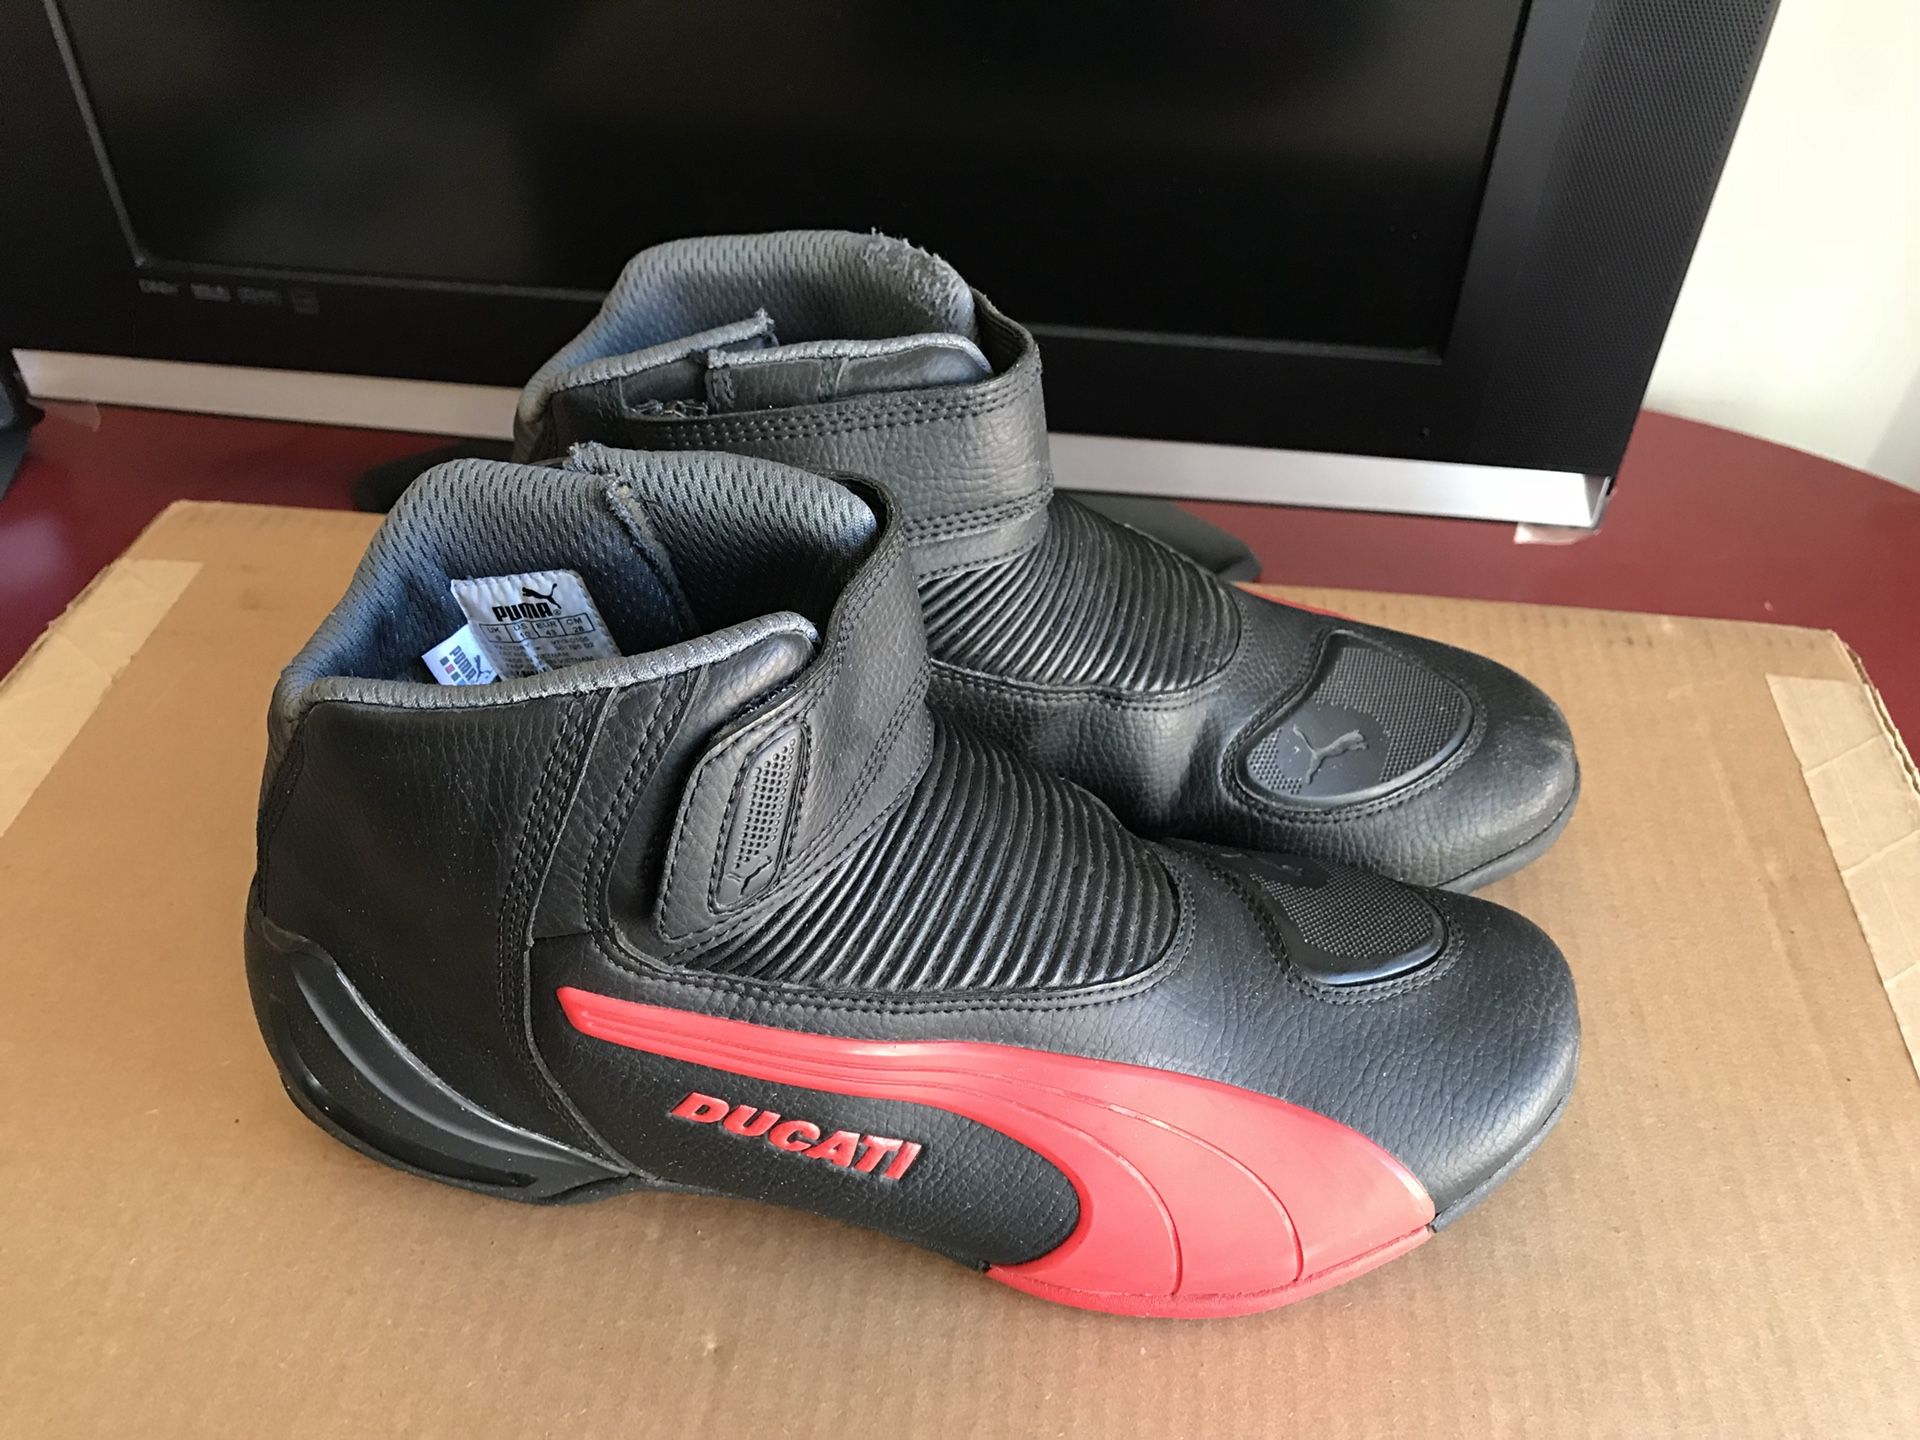 Puma Ducati Ankle Boots US Size 10 for $55 or Best Offer